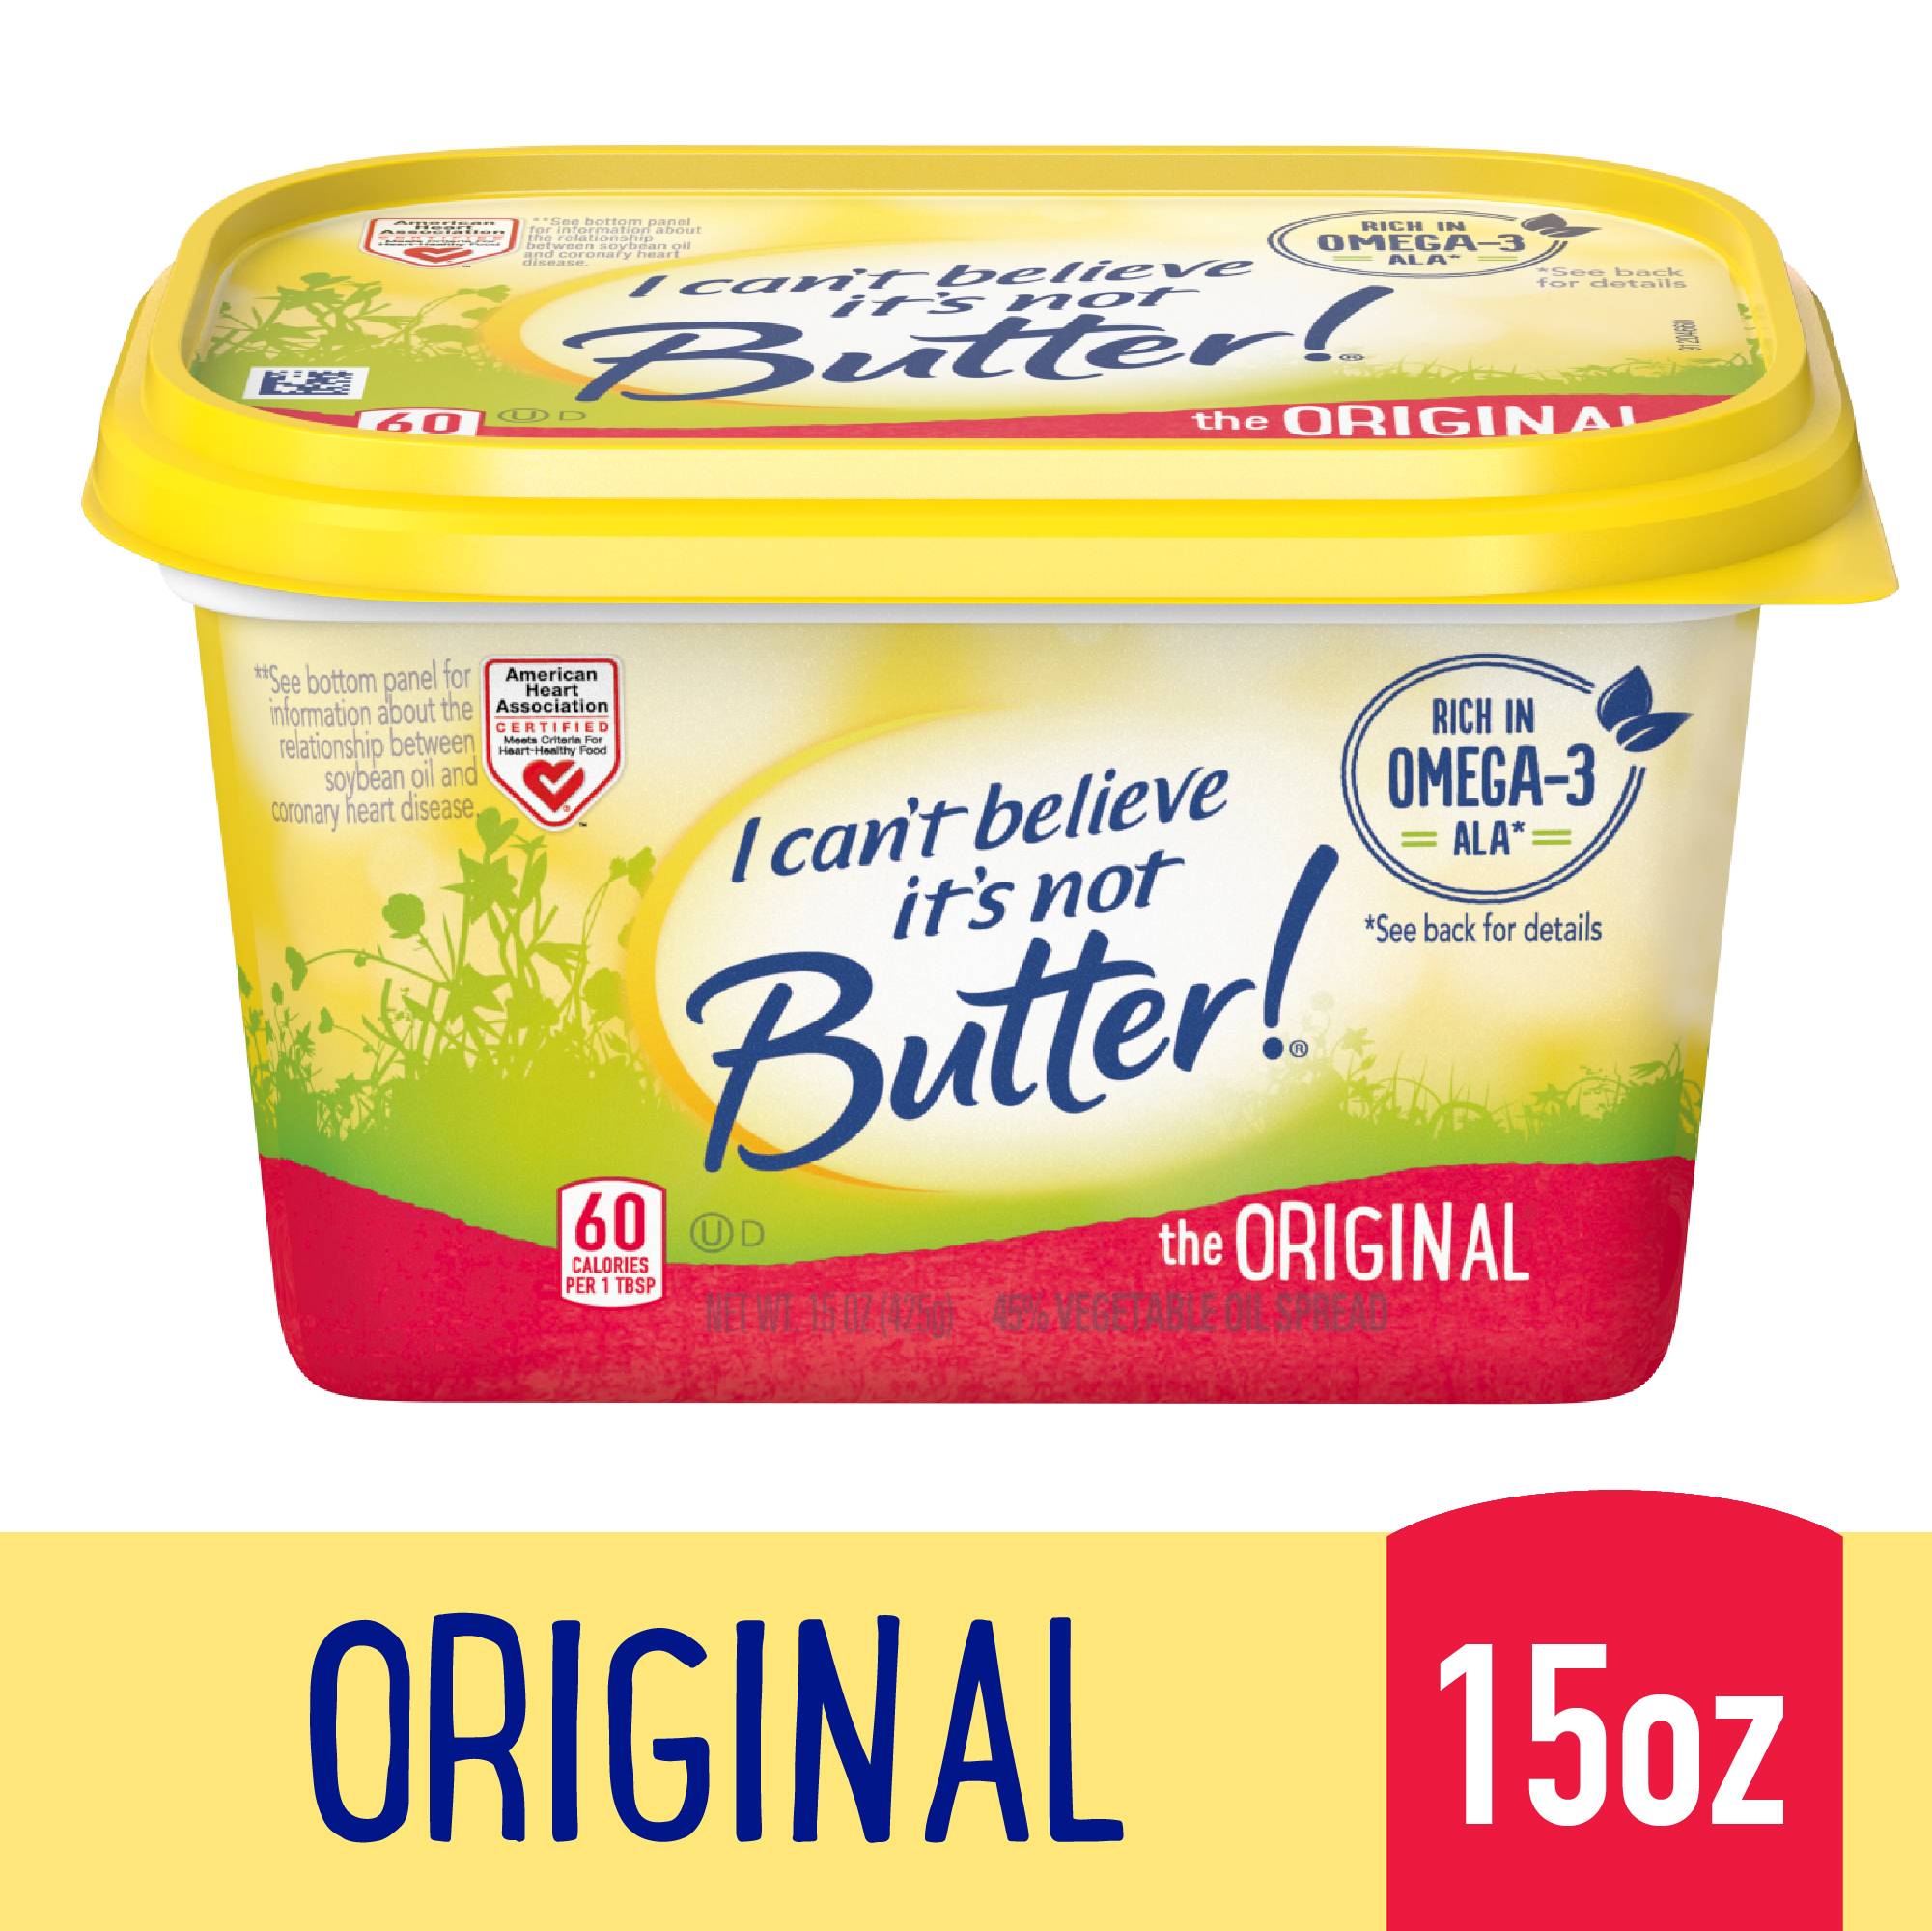 I Can't Believe It's Not Butter Original Spread, 15 oz Tub (Refrigerated) - image 3 of 9